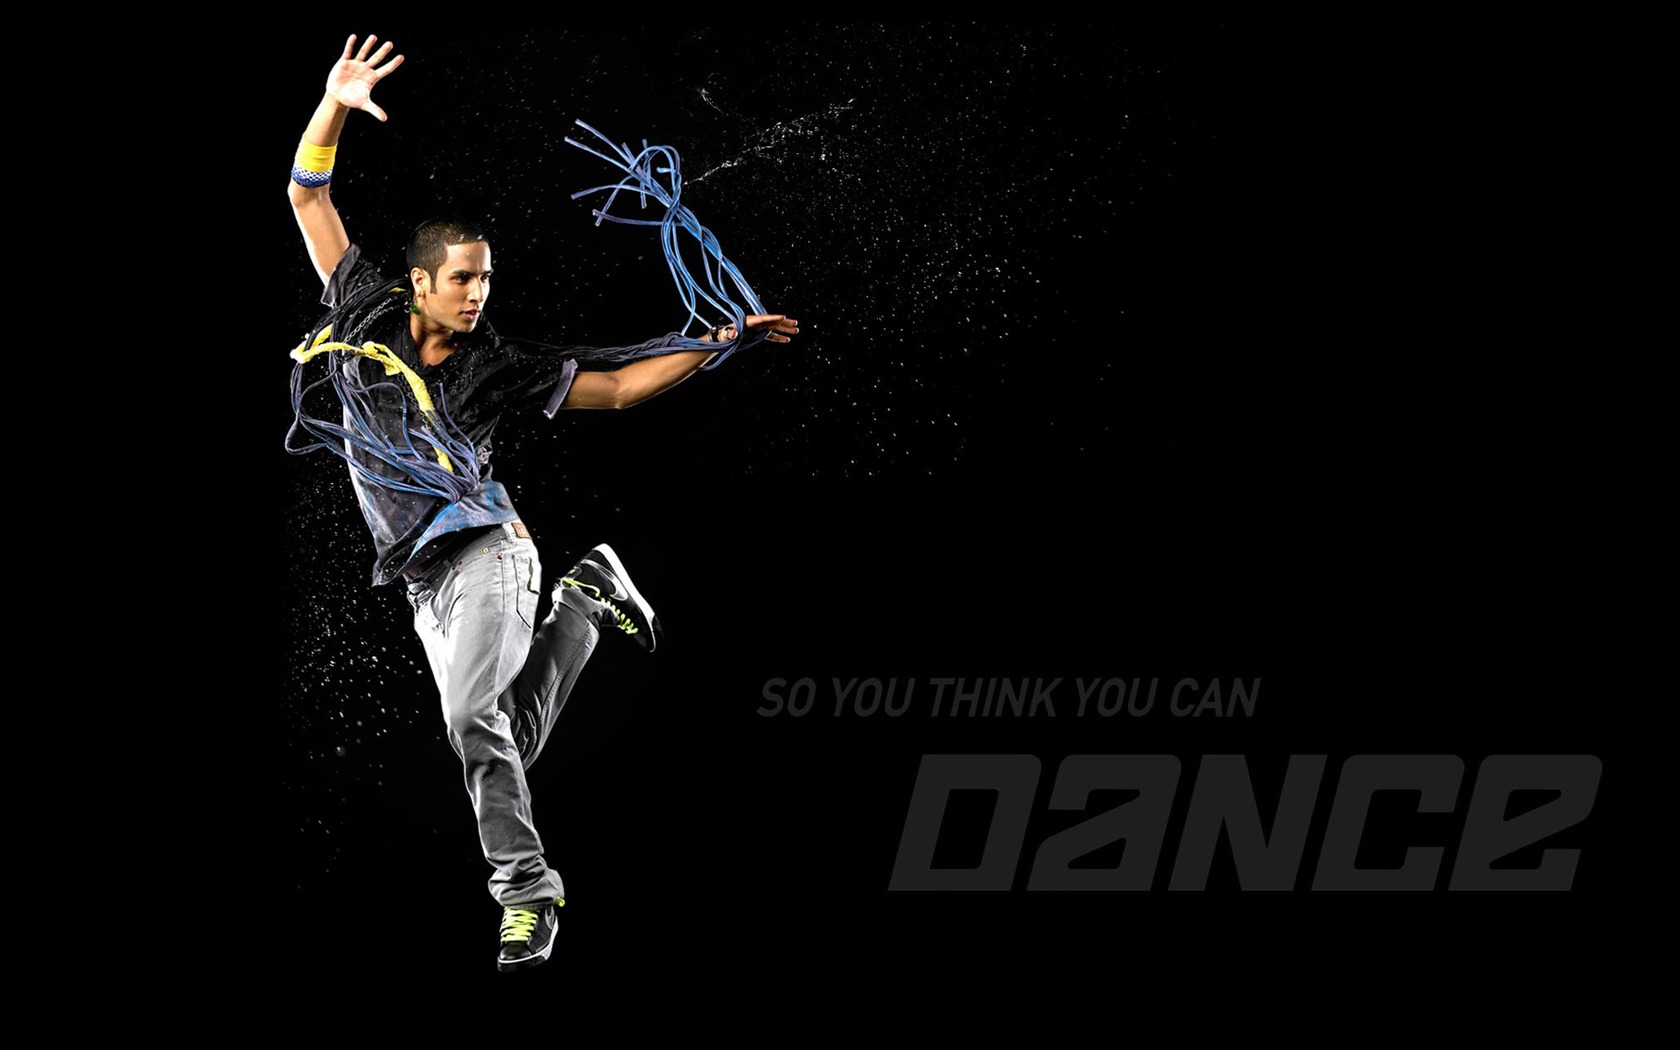 So You Think You Can Dance 舞林争霸 壁纸(一)4 - 1680x1050